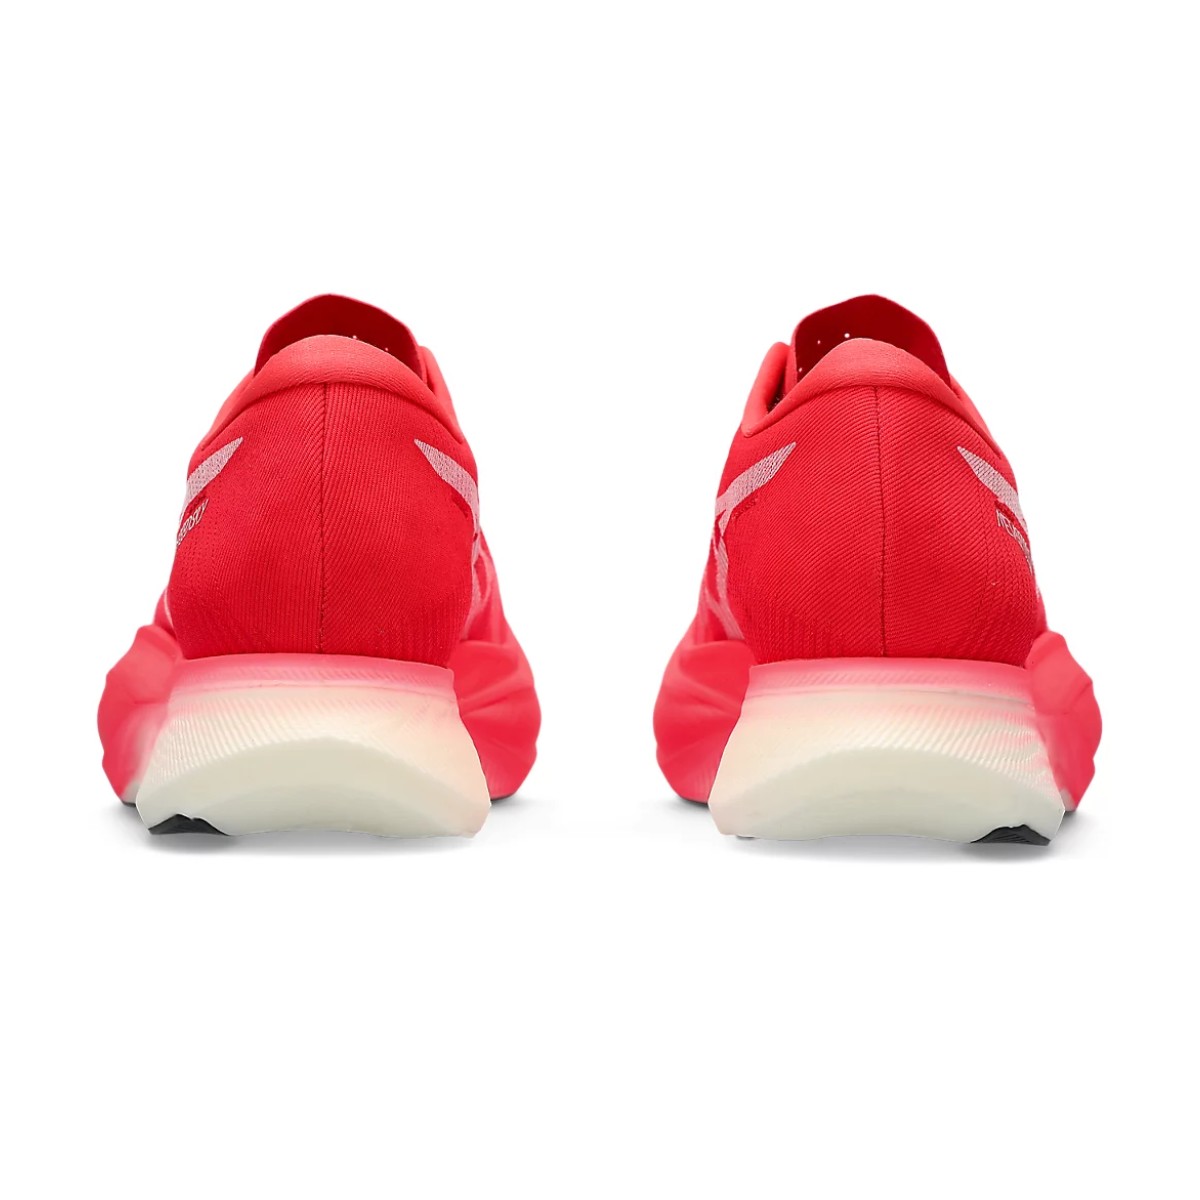 Asics Metaspeed Sky+ Red White AW23 I Shoes Offer At The Best Price